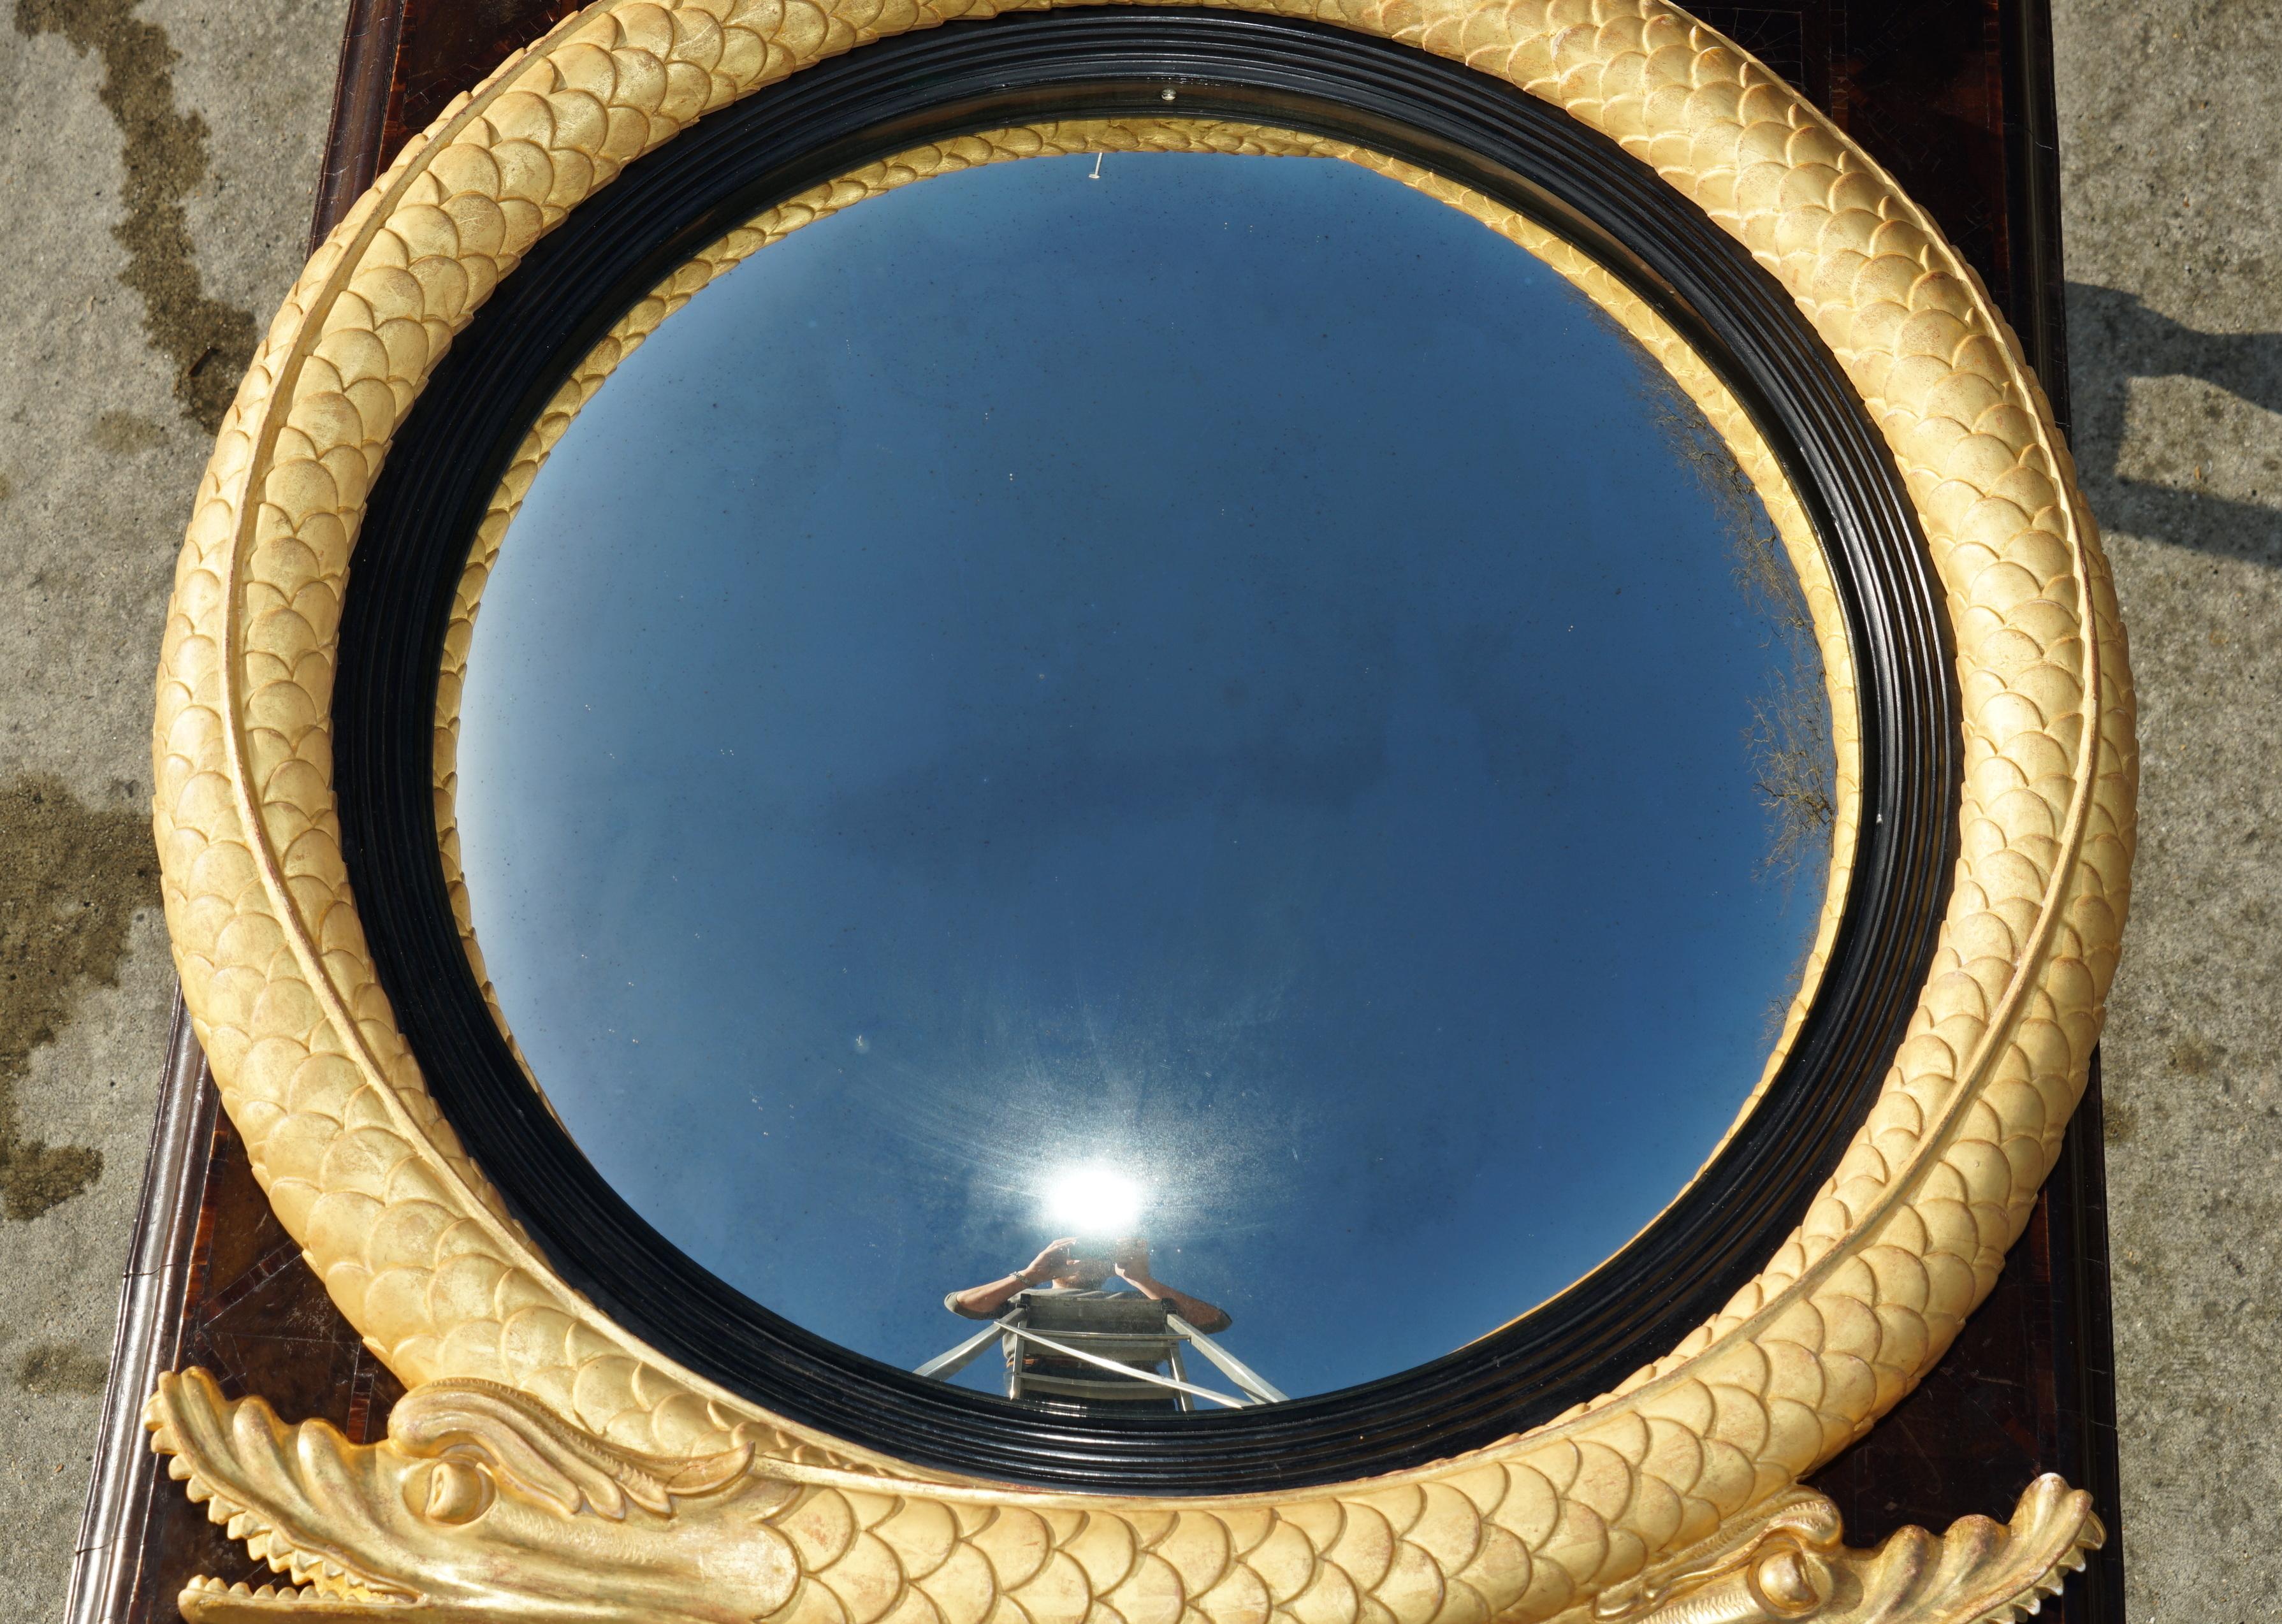 PAIR OF EXTRA LARGE STUNNING REGENCY STYLE GOLD GILT TWIN SERPENT CONVEX MiRRORS For Sale 3